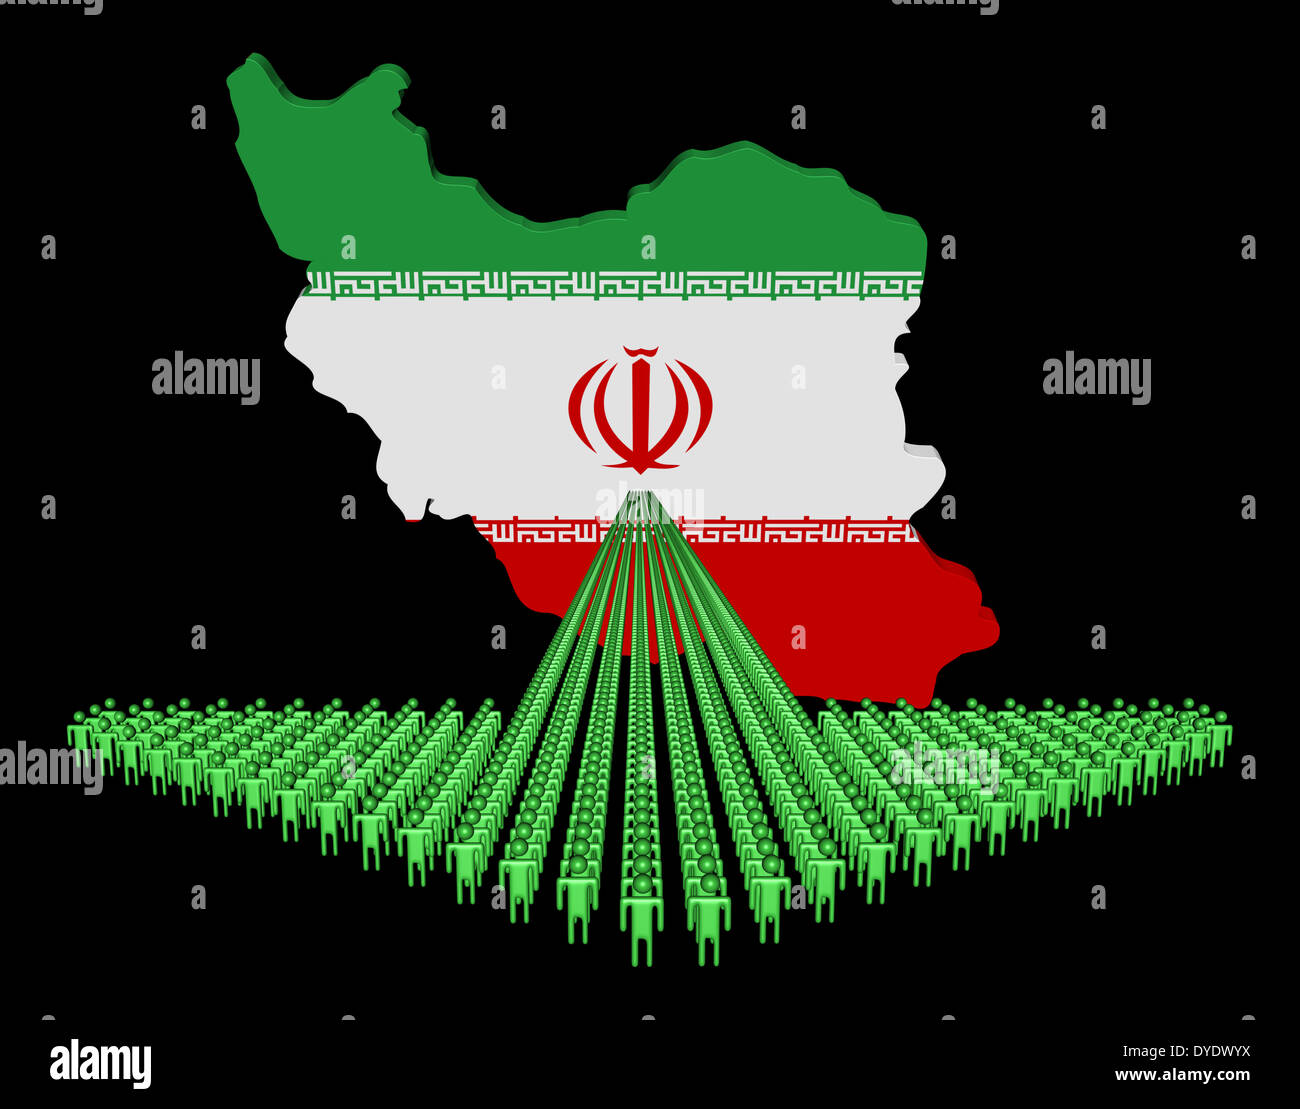 Arrow of people with Iran map flag illustration Stock Photo